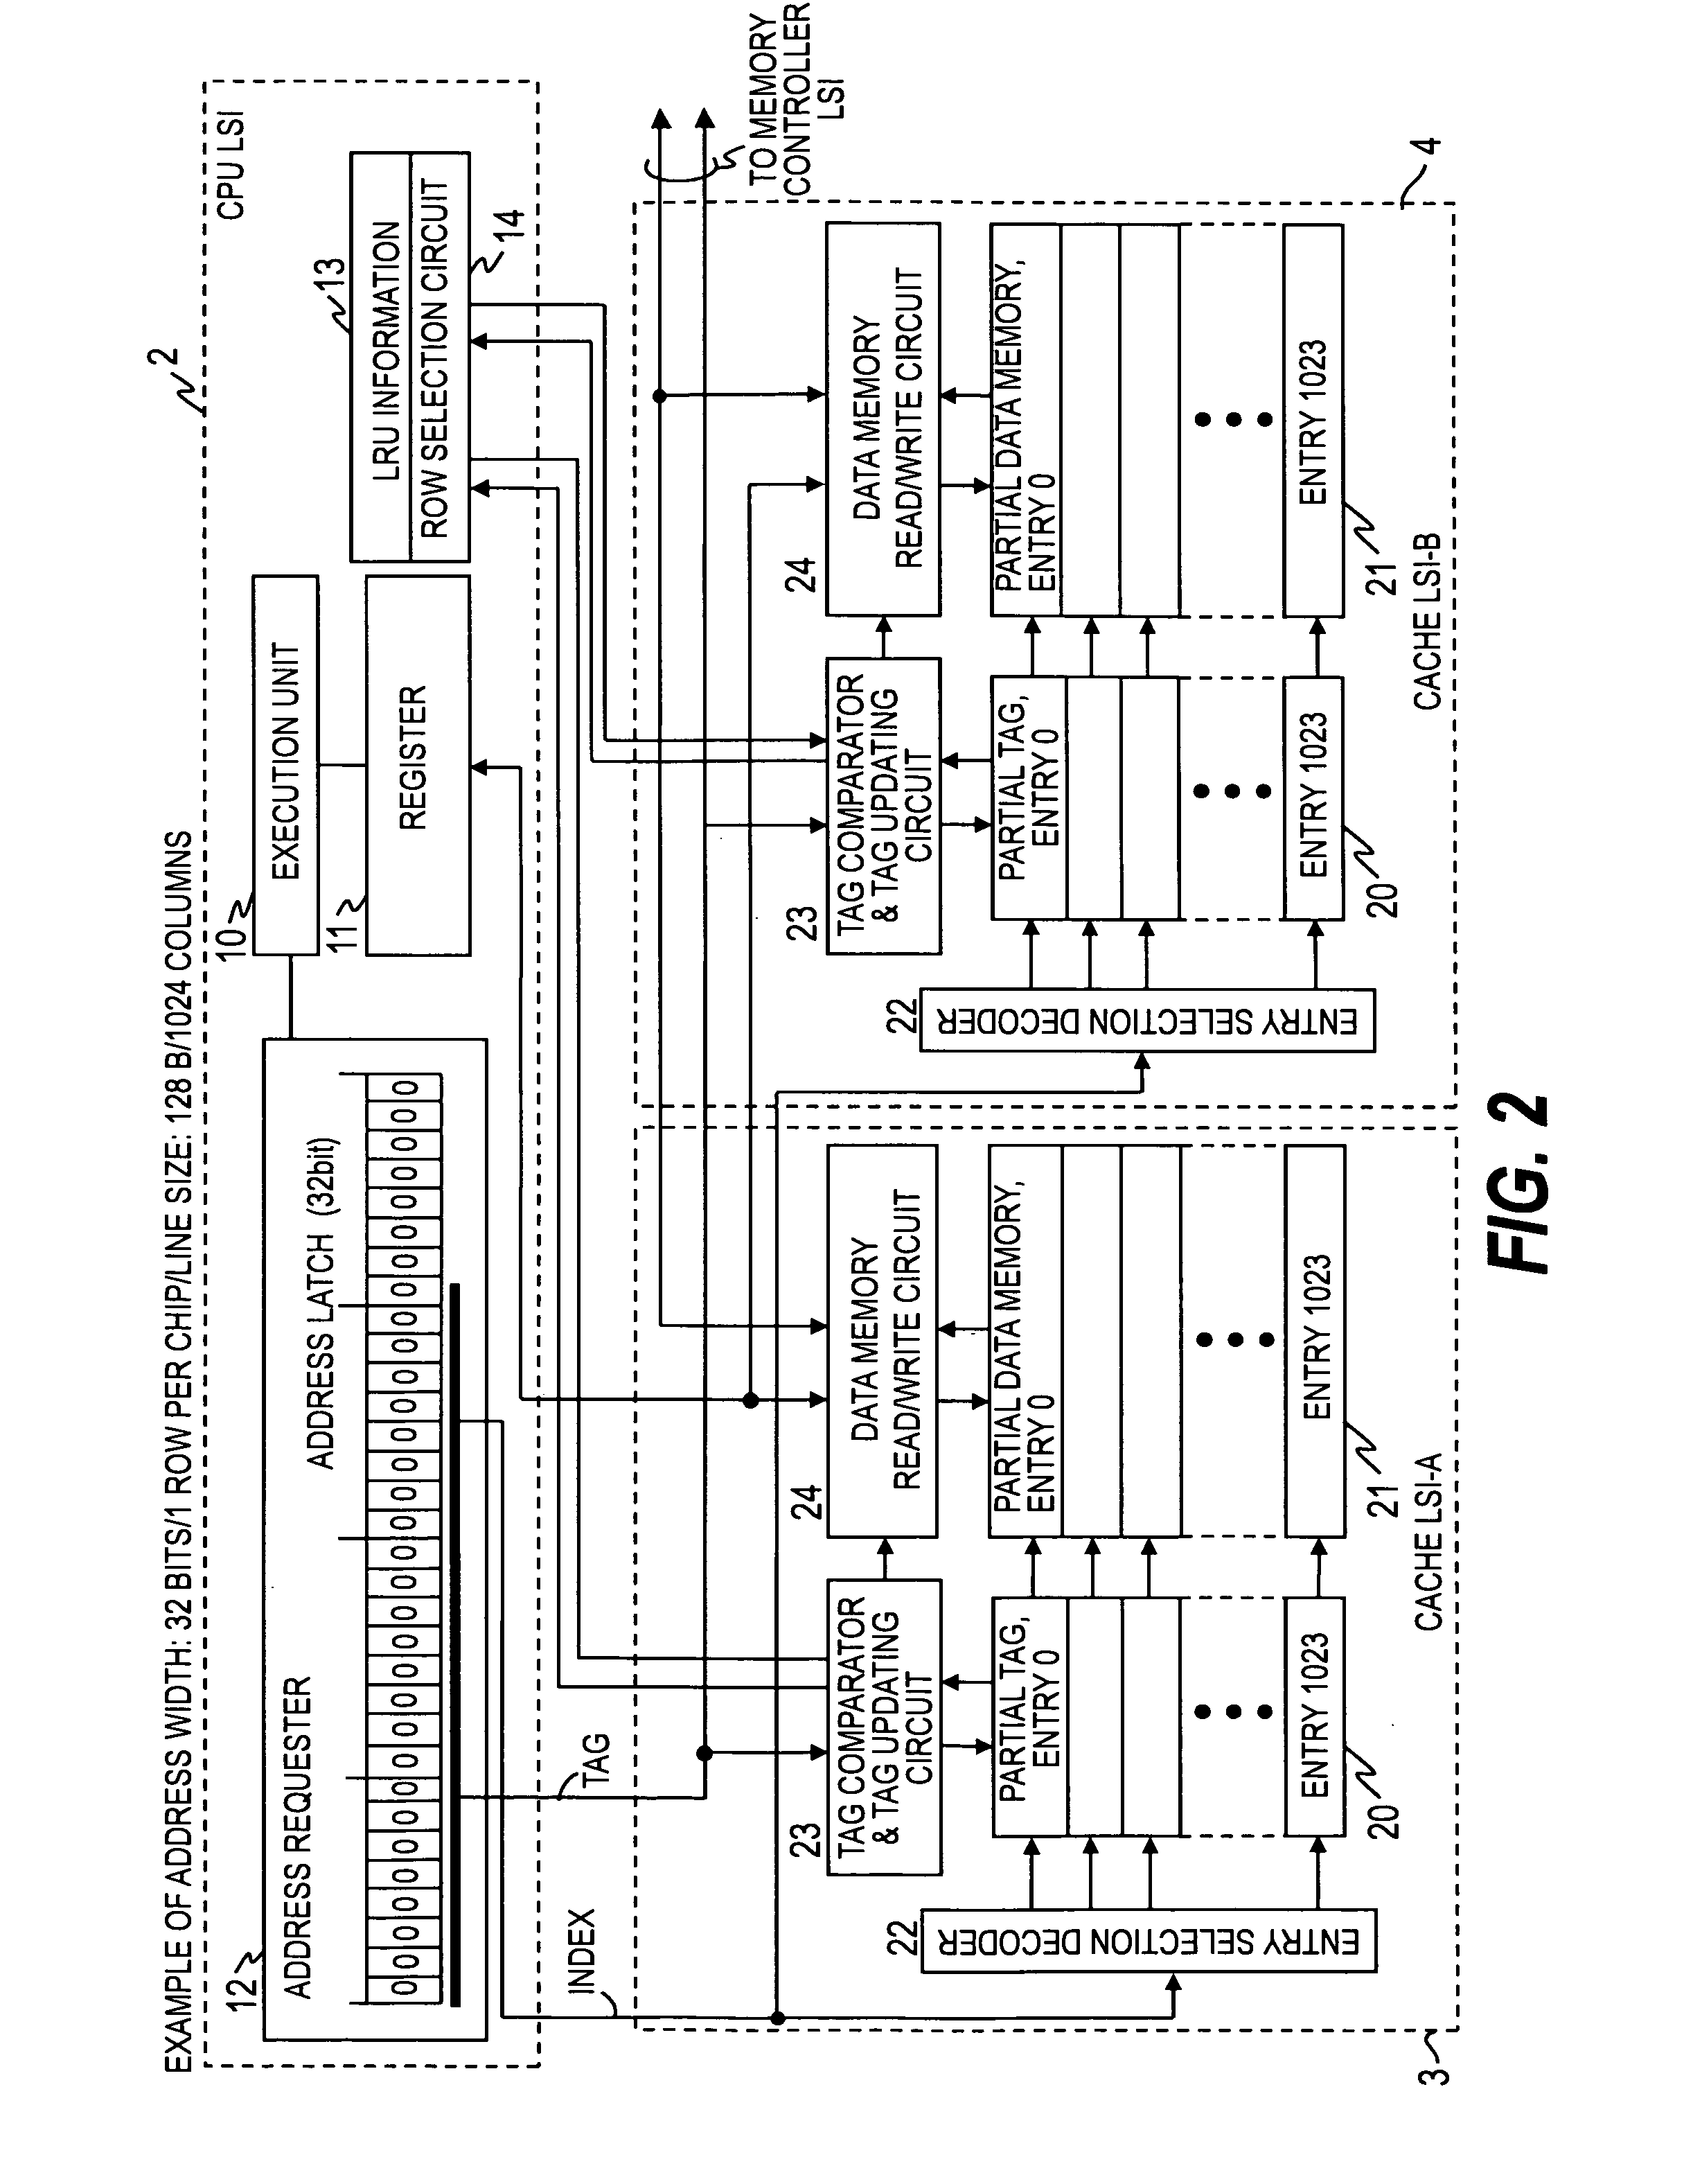 Processor having a cache memory which is comprised of a plurality of large scale integration